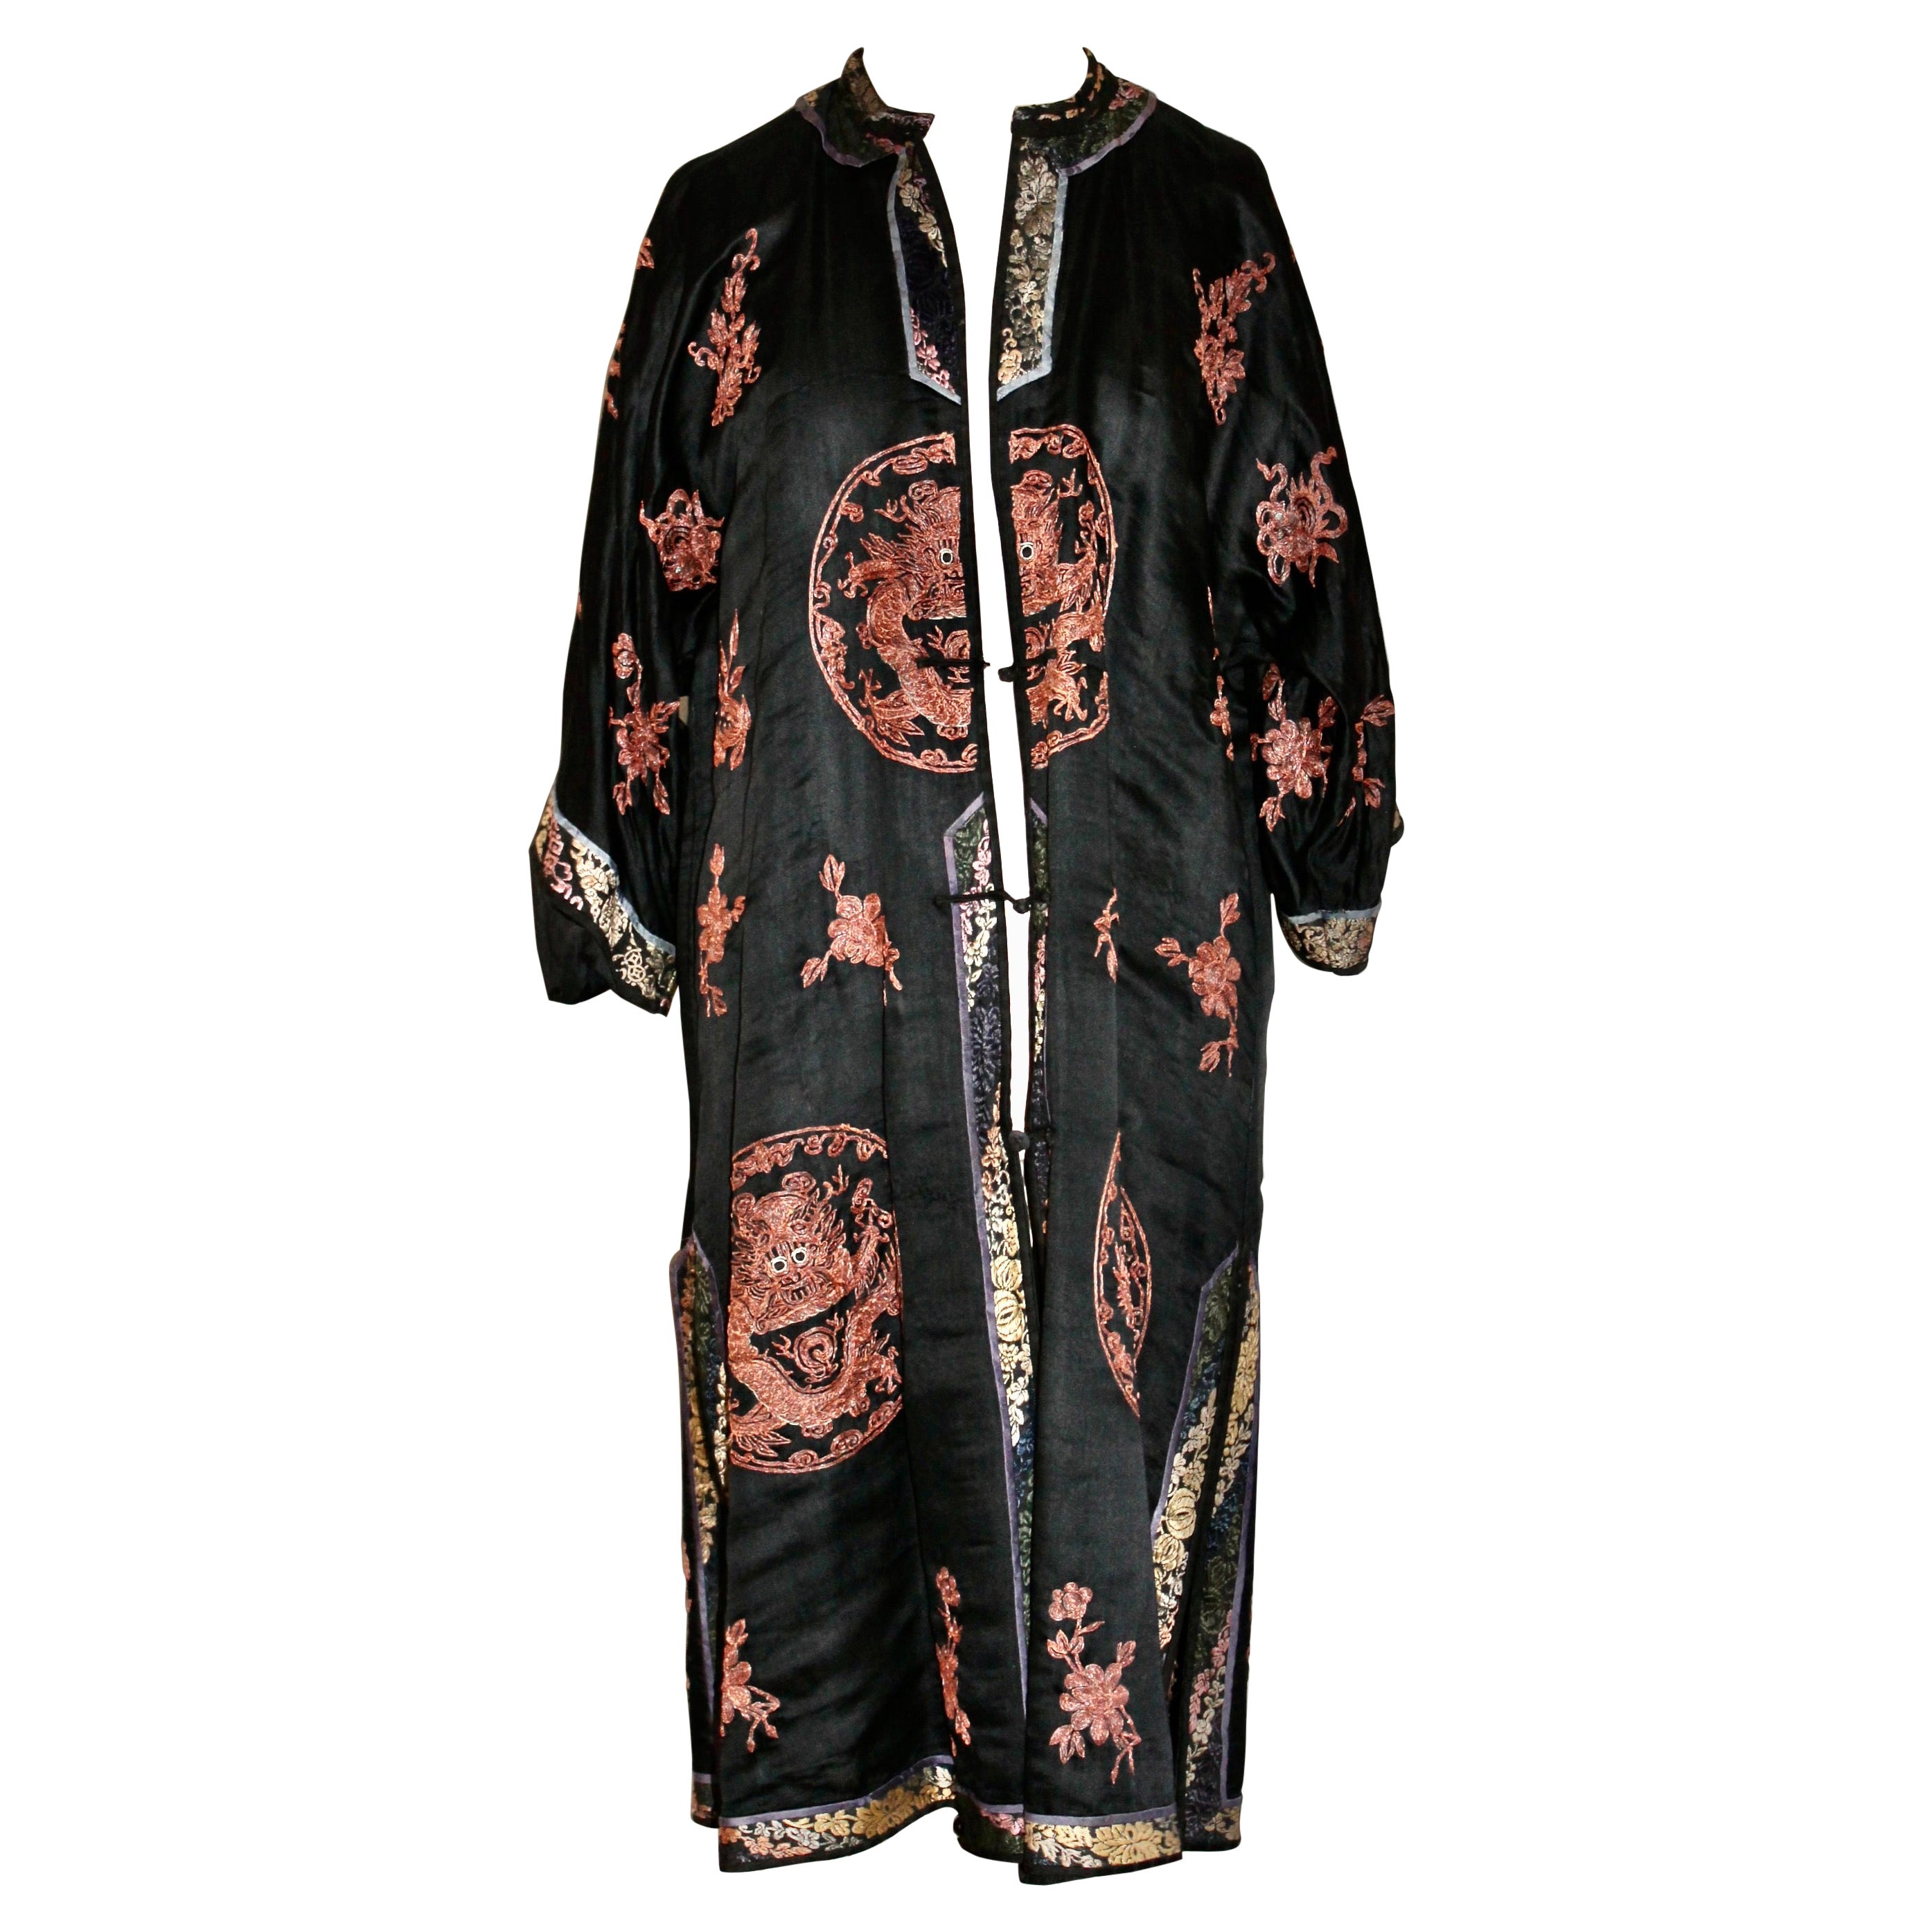 Early 20th Century Chinese Robe with Metallic Dragon Embroidery For Sale